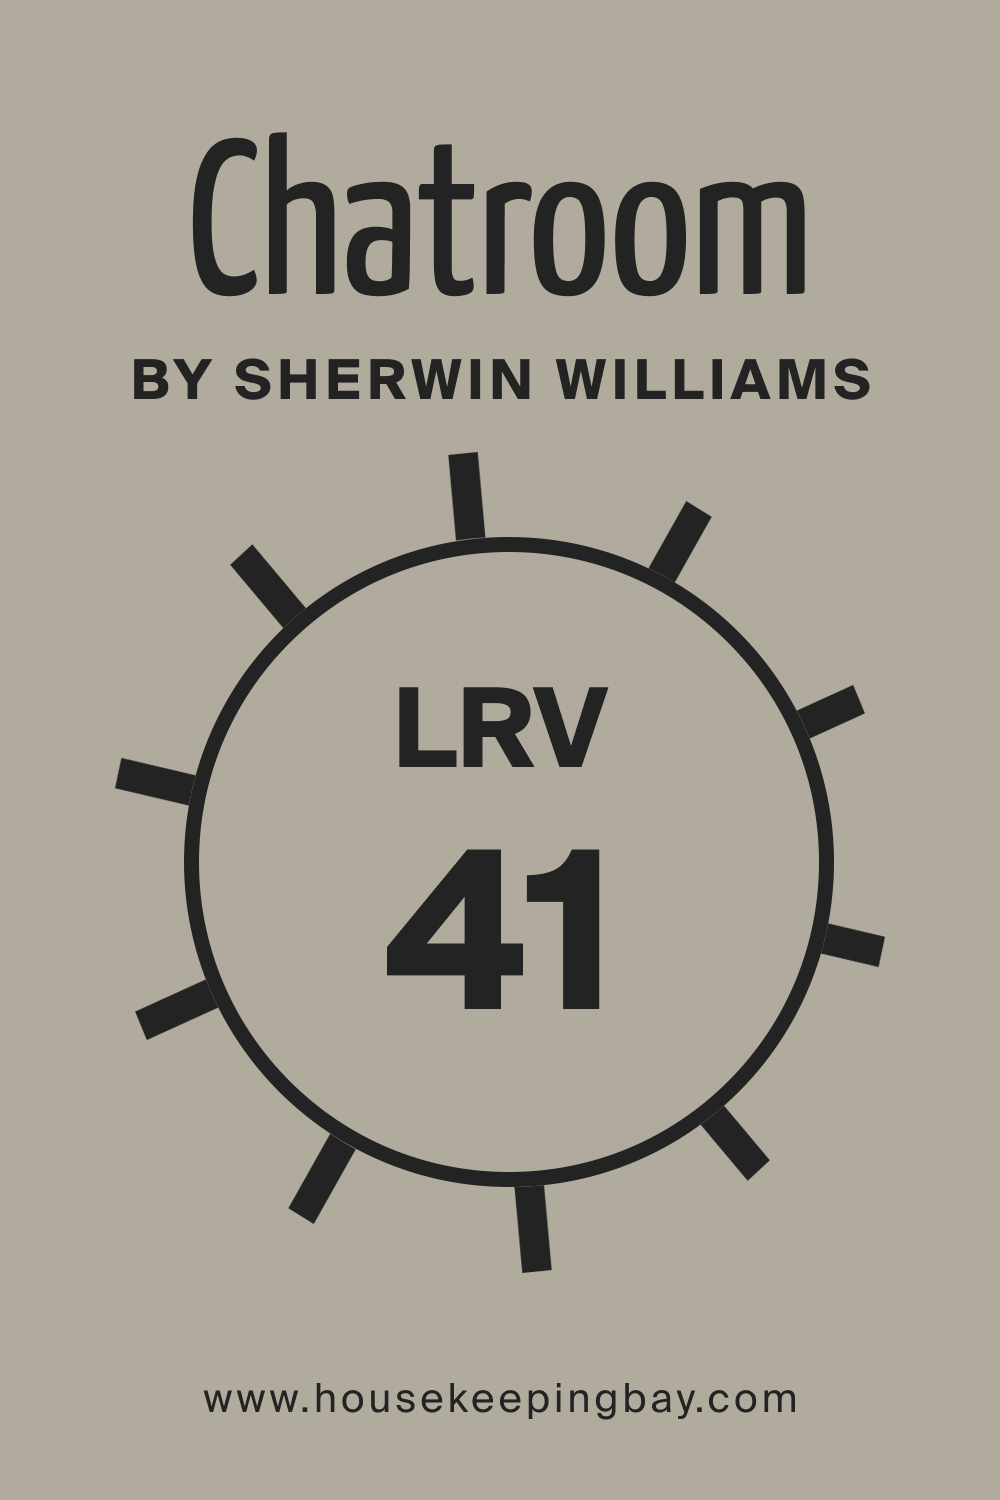 SW 6171 Chatroom by Sherwin Williams. LRV 41